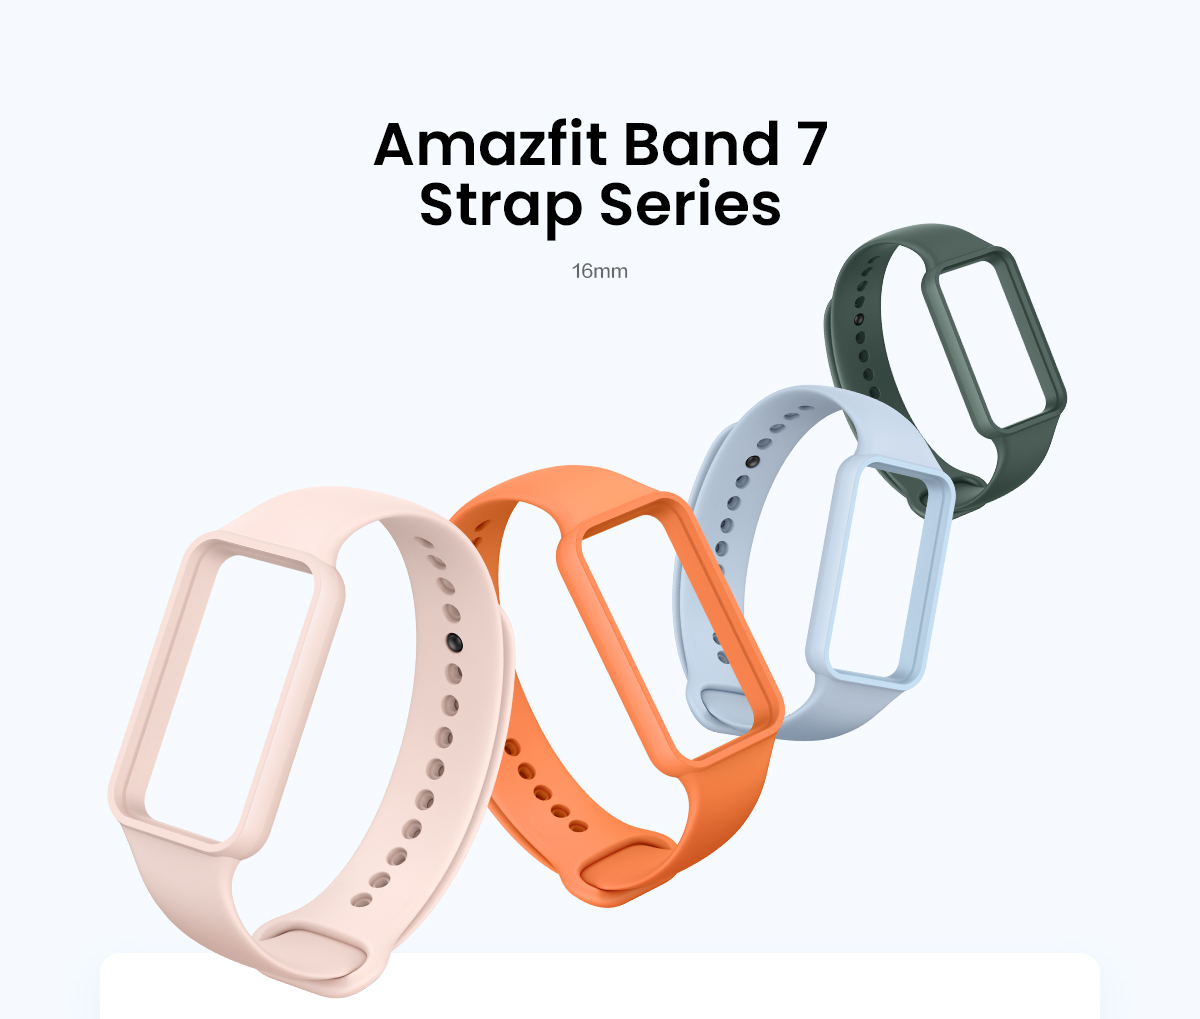  Amzpas TPU Bands for Amazfit Band 7 Fitness & Health Tracker, 3  Pack Soft Breathable Wristband, Adjustable Replacement Sportt Strap for  Women Men : Sports & Outdoors